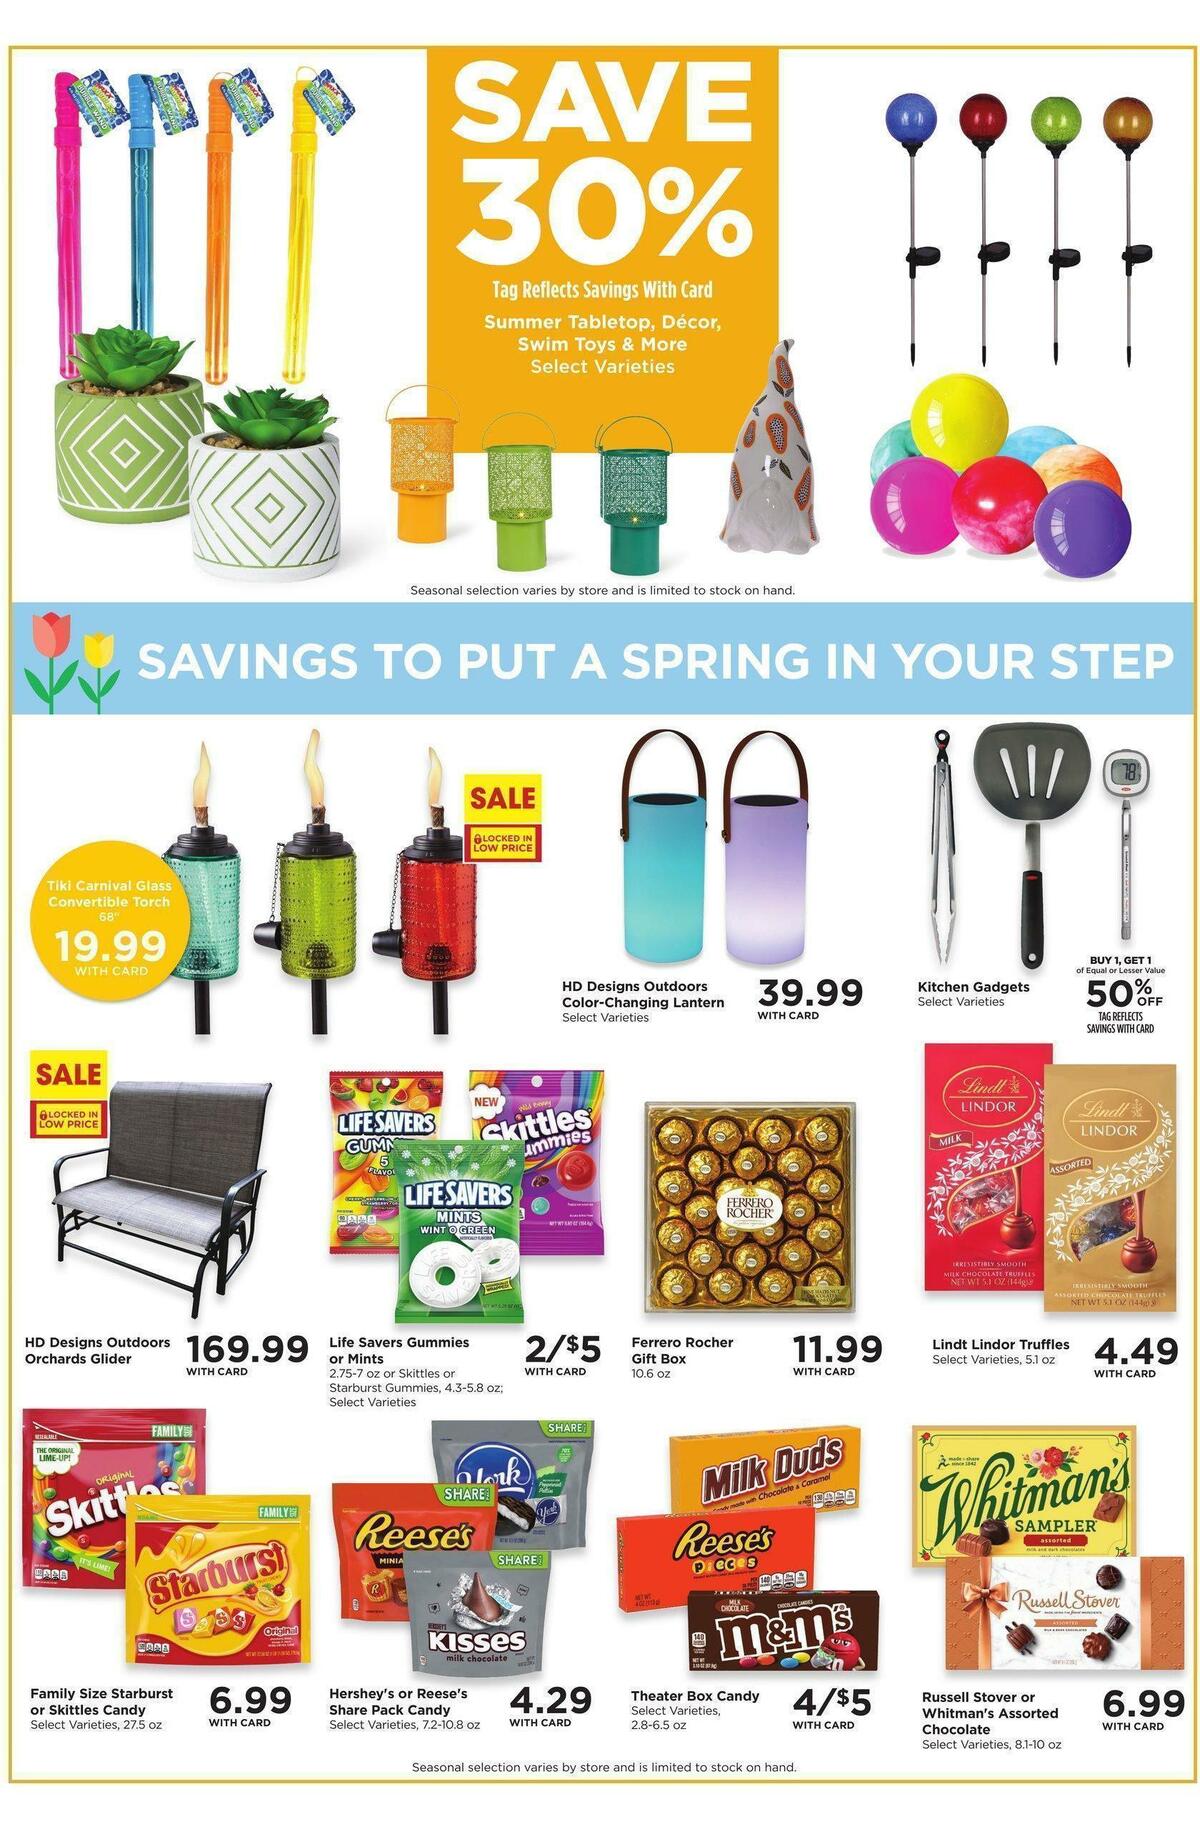 QFC Weekly Ad from April 19